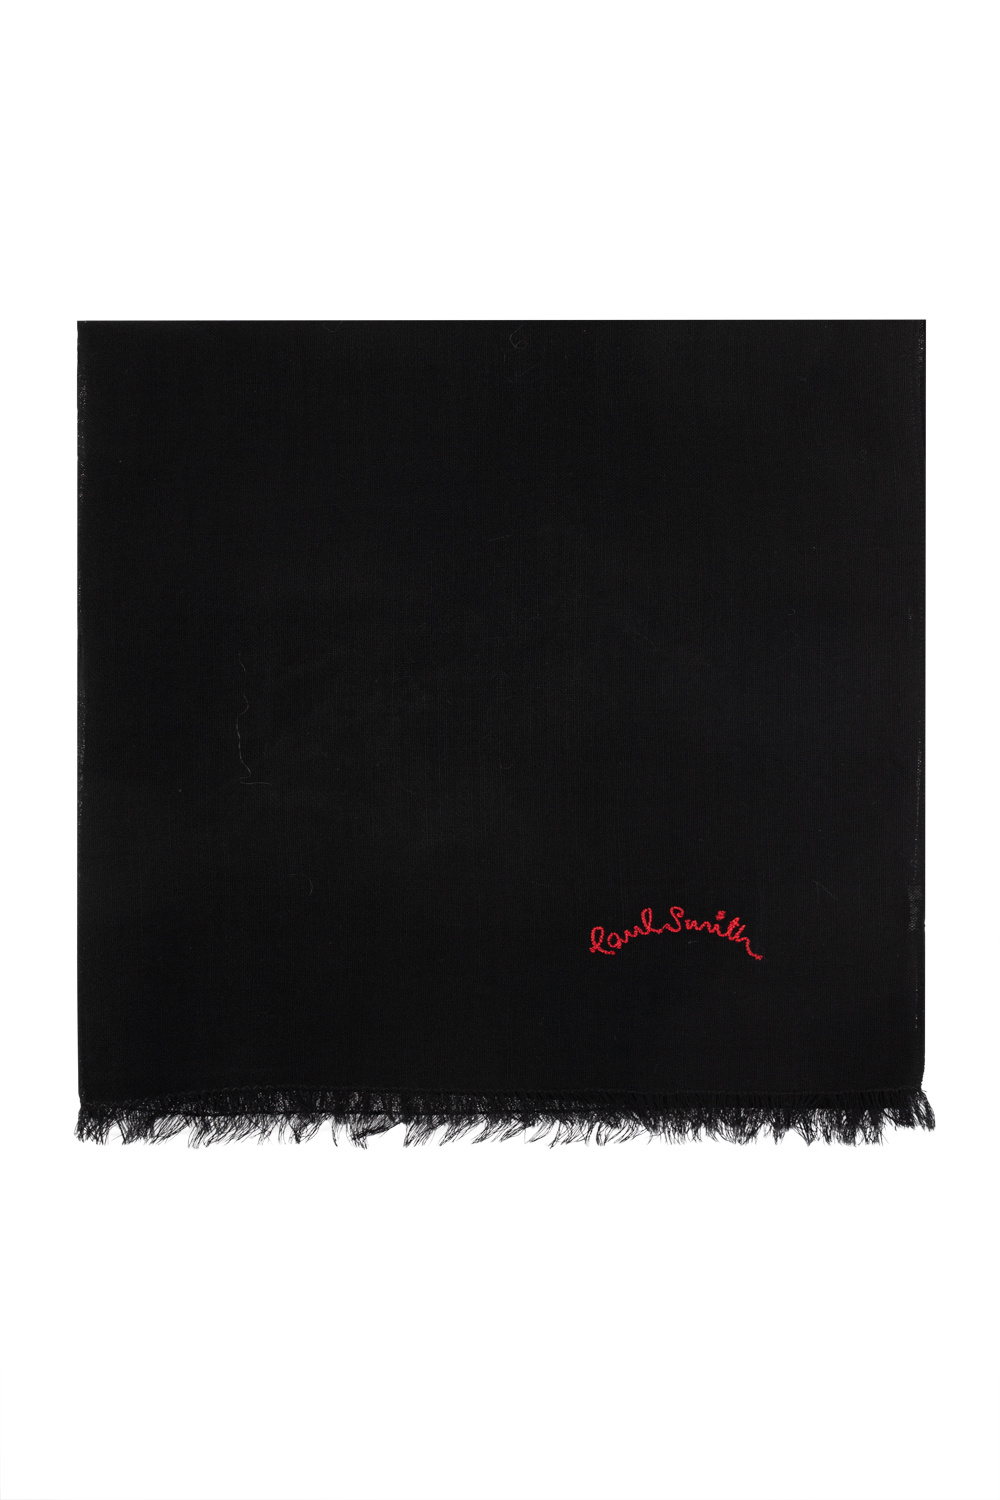 Paul Smith Embroidered scarf